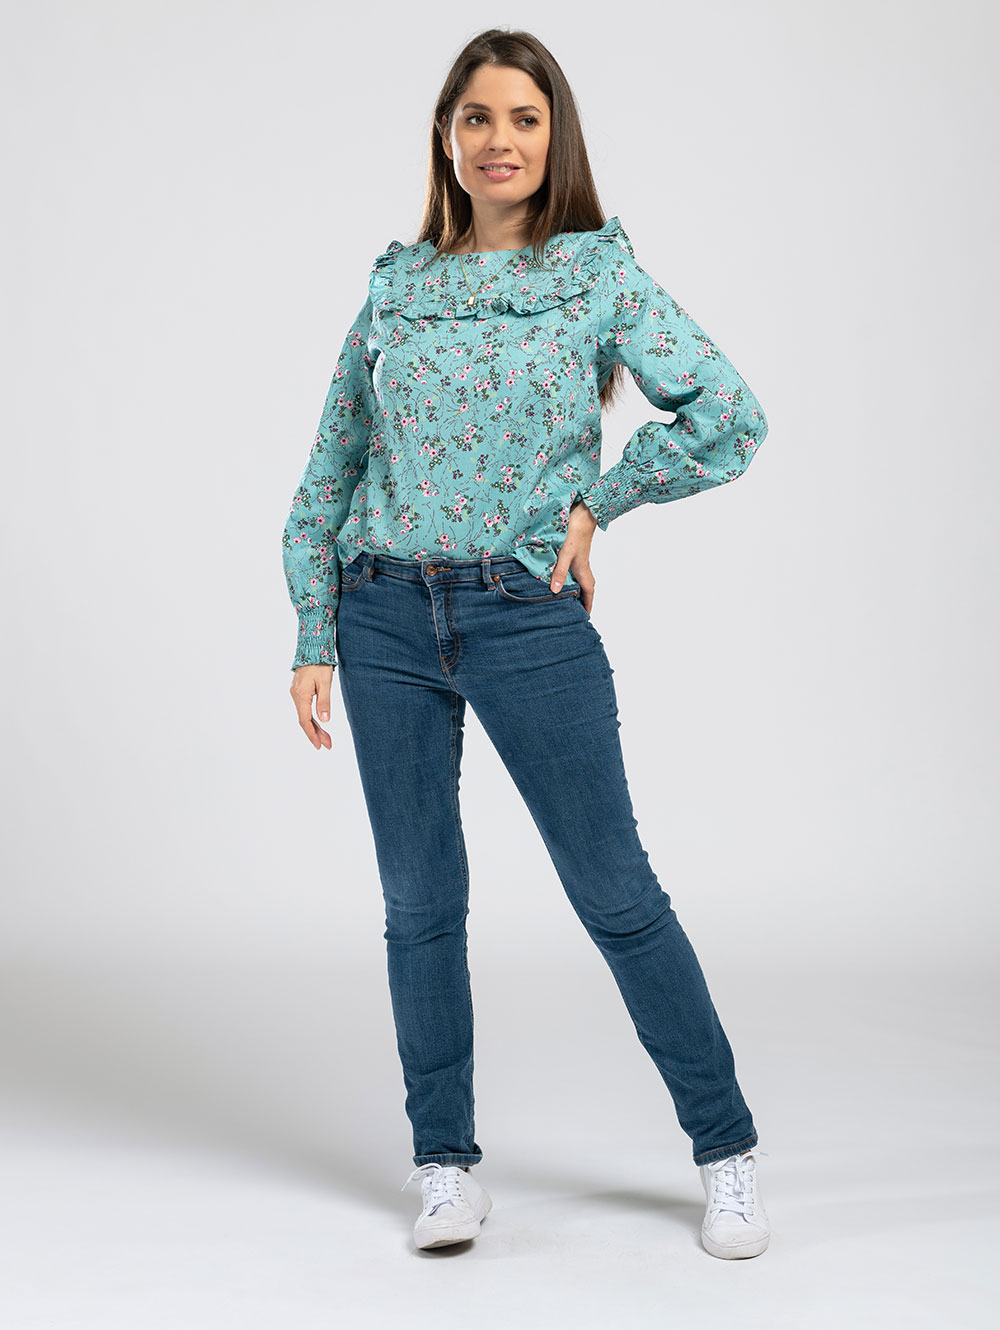 Ruffle Blouse in Turquoise Blue